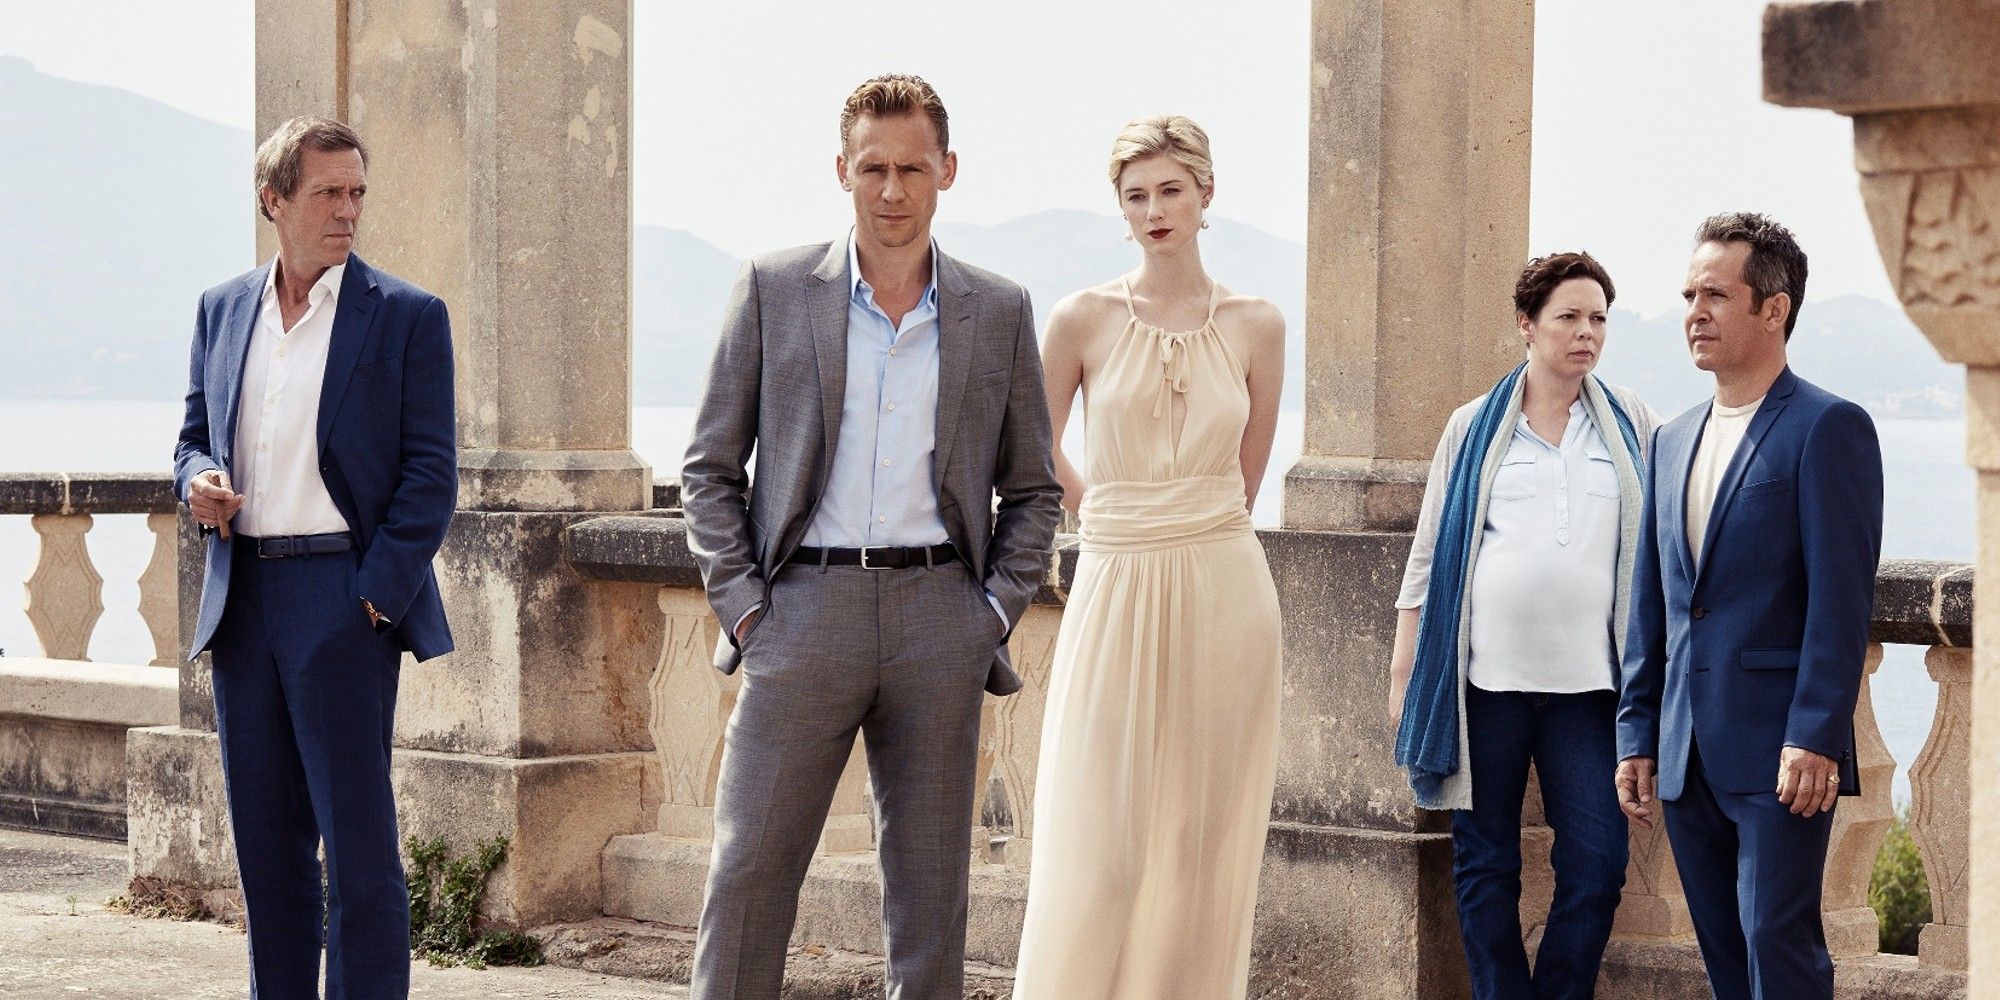 Hugh Laurie, Tom Hiddleston, Elizabeth Debicki, Olivia Colman and Tom Holland as their characters in The Night Manager